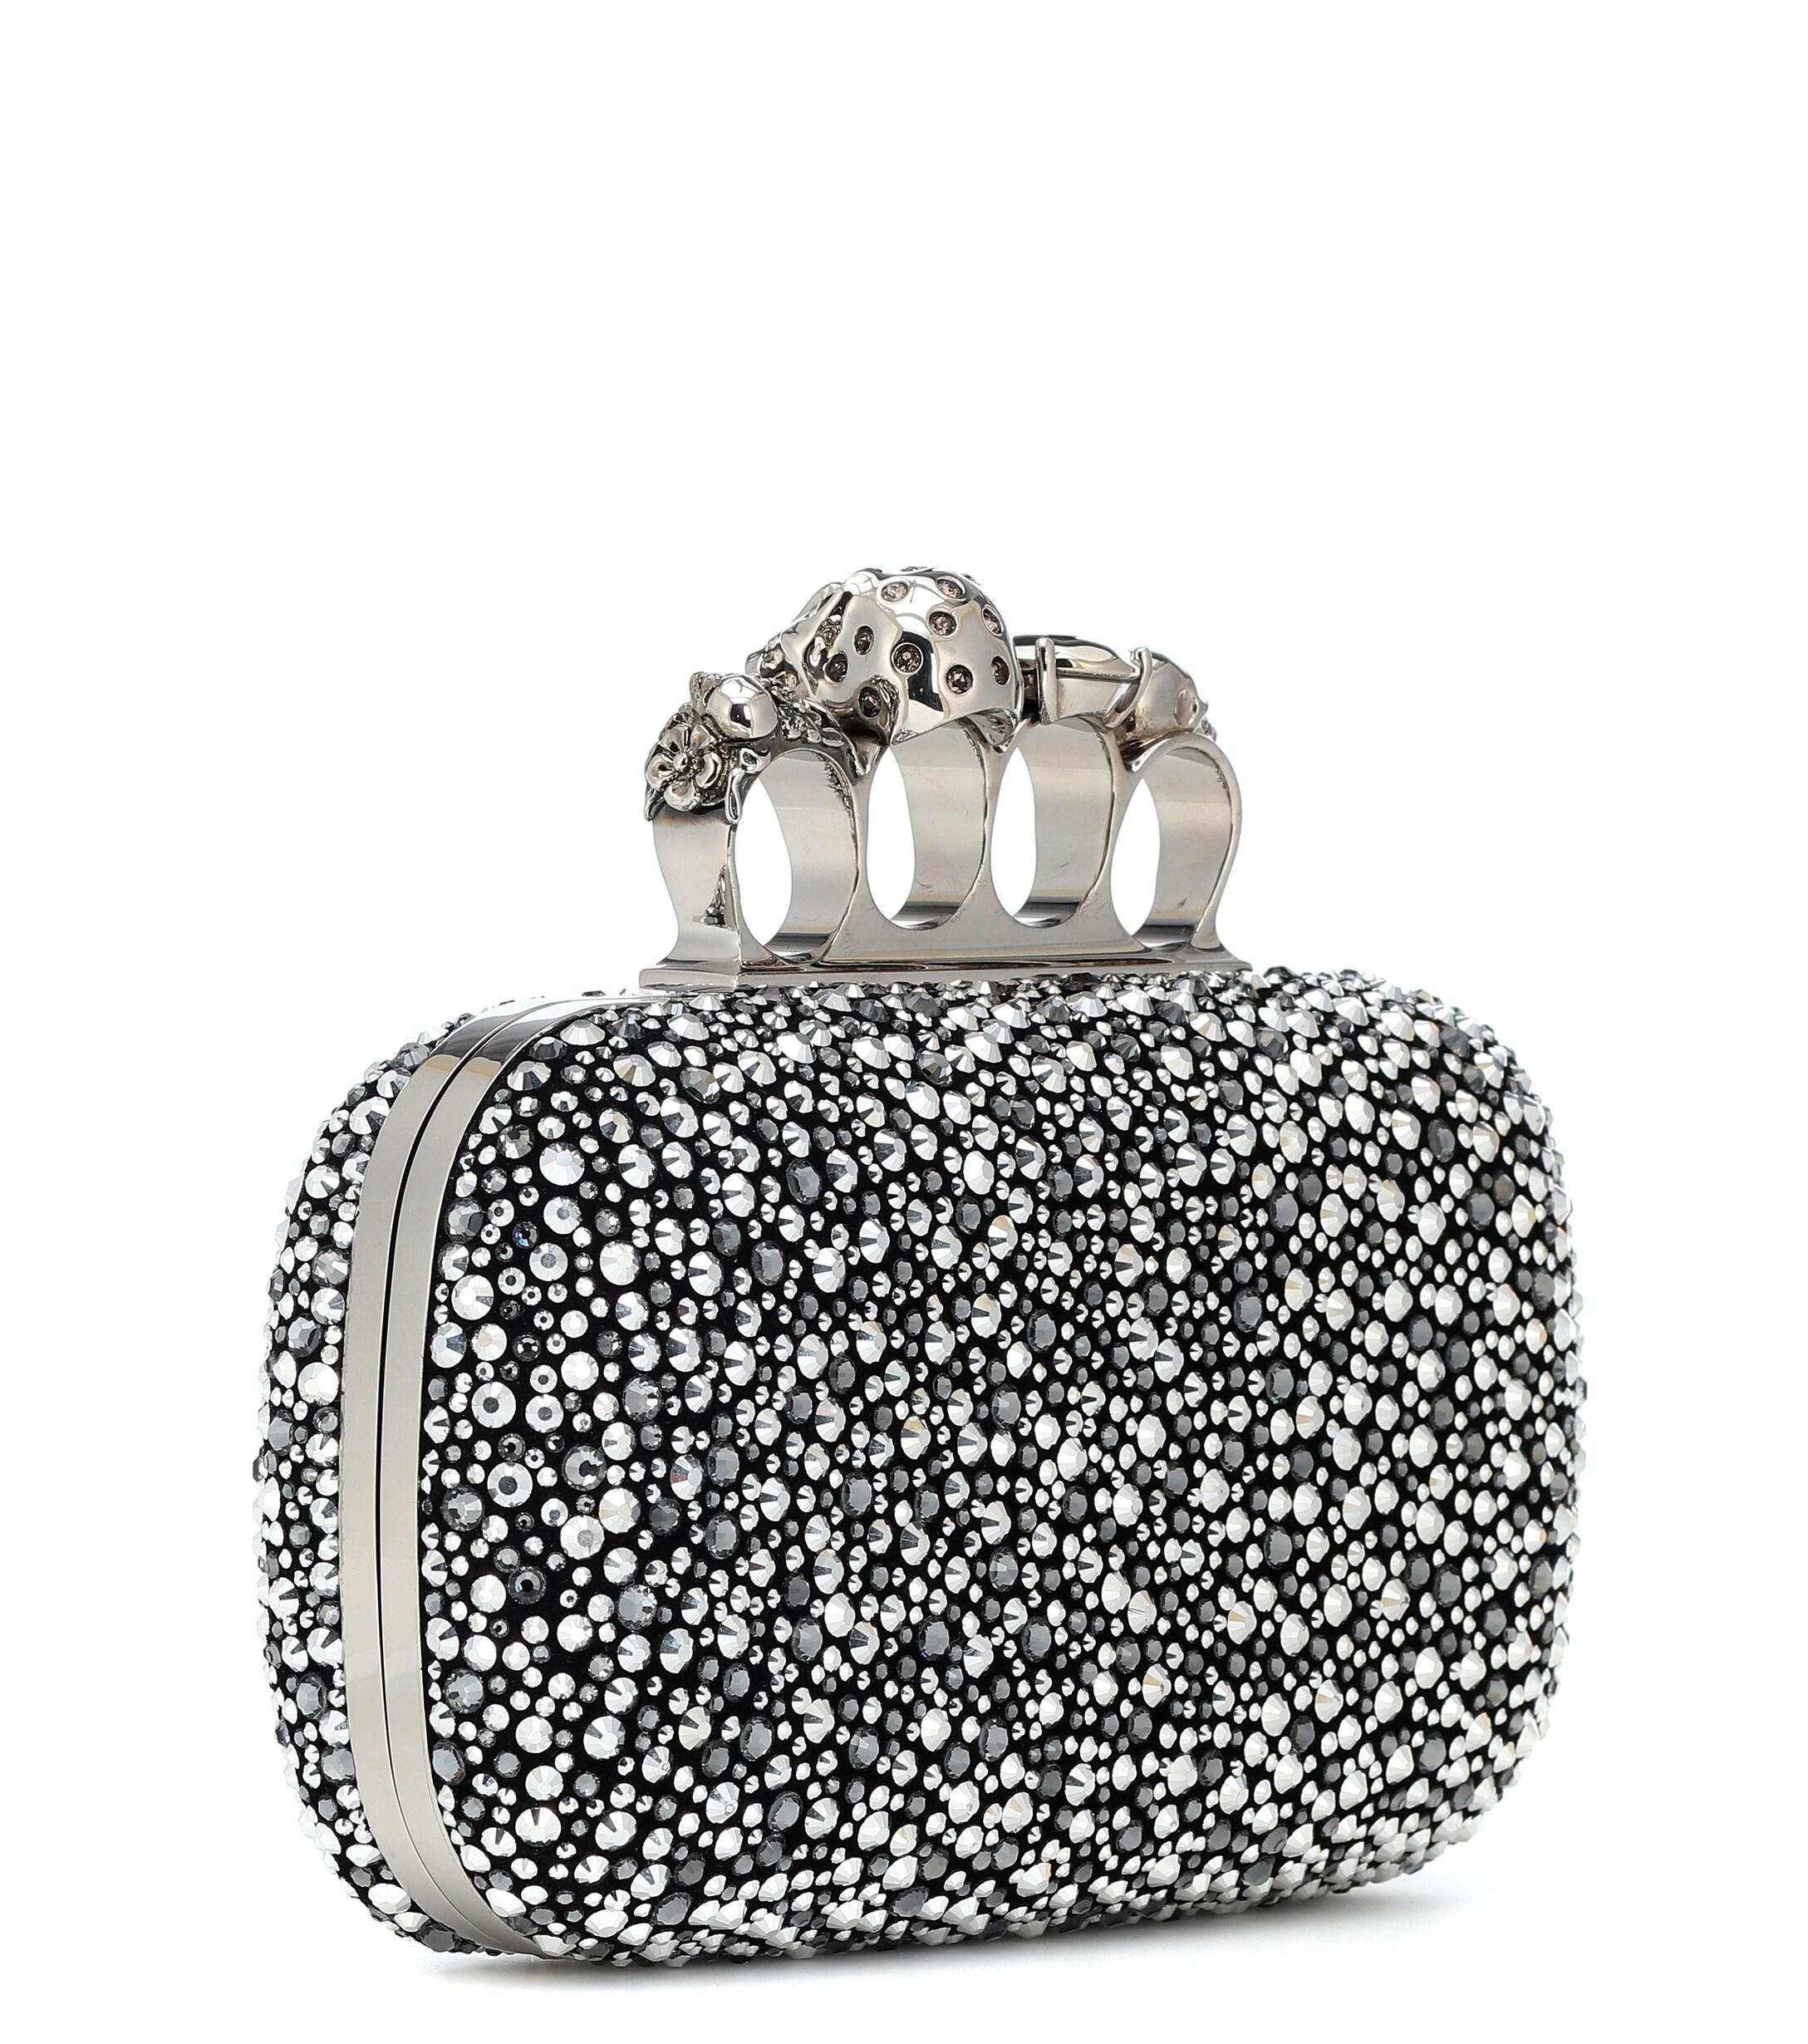 Alexander McQueen Four Ring Crystalembellished Clutch in Silver